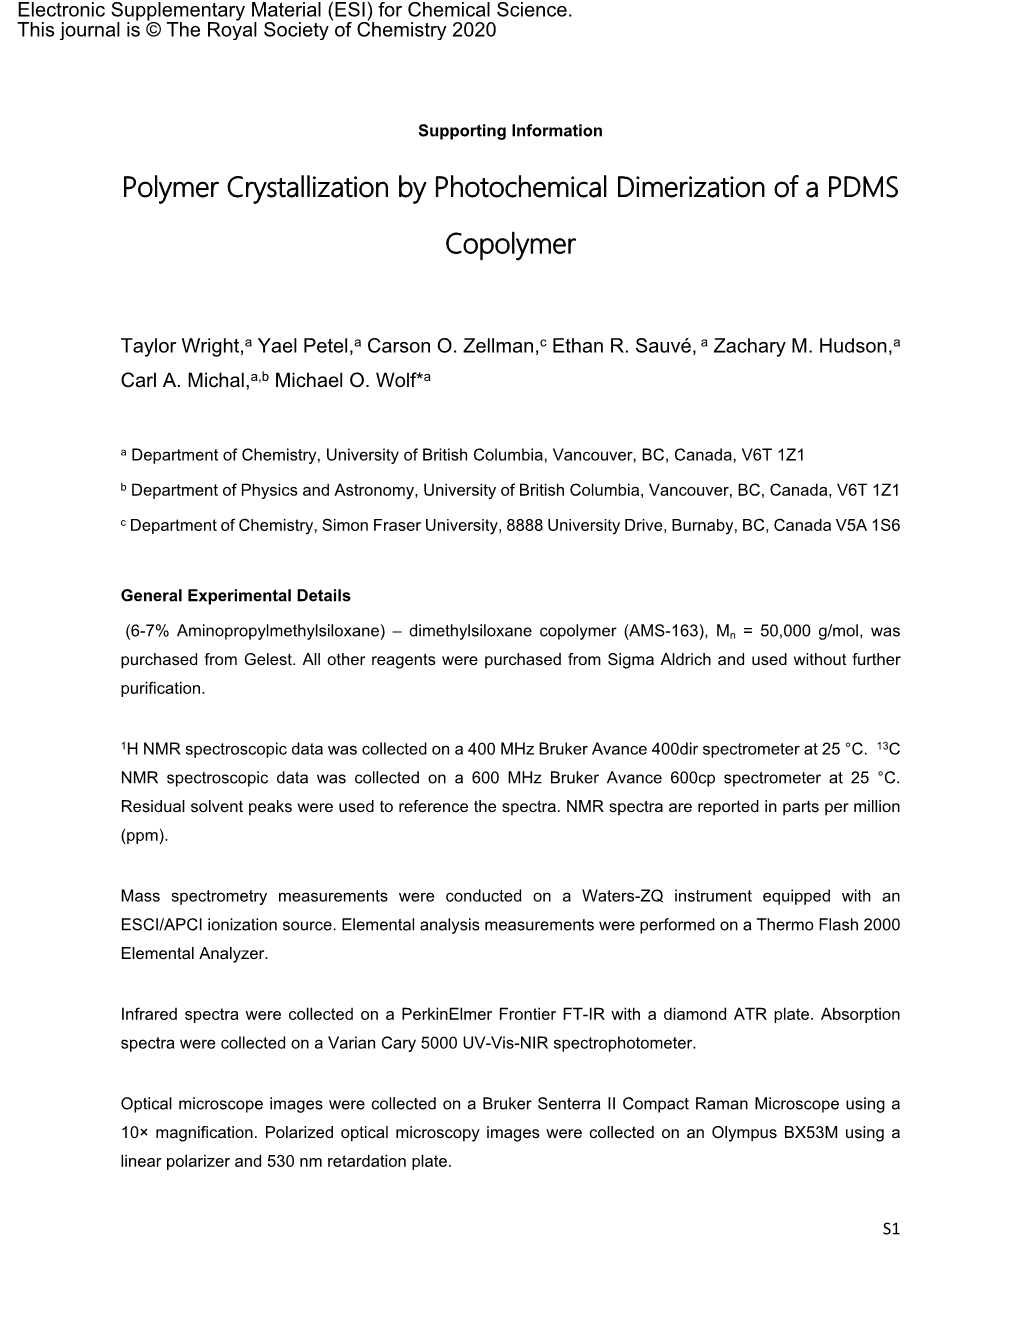 Polymer Crystallization by Photochemical Dimerization of a PDMS Copolymer